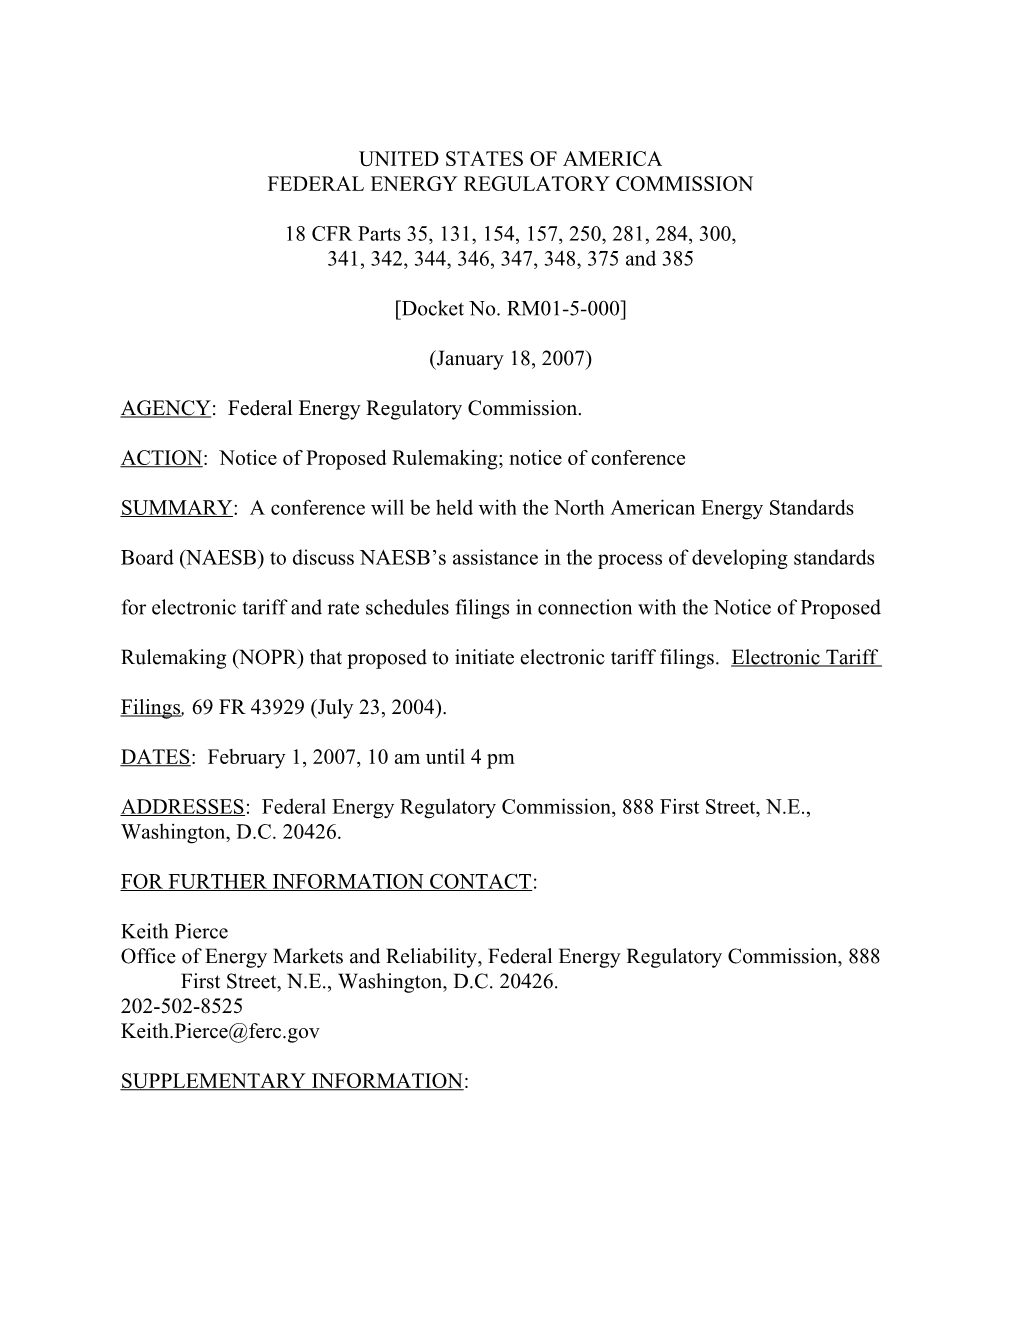 January 18, 2007 NOPR Re: E-Tariff and NAESB Standards in Docket No. RM01-5-000